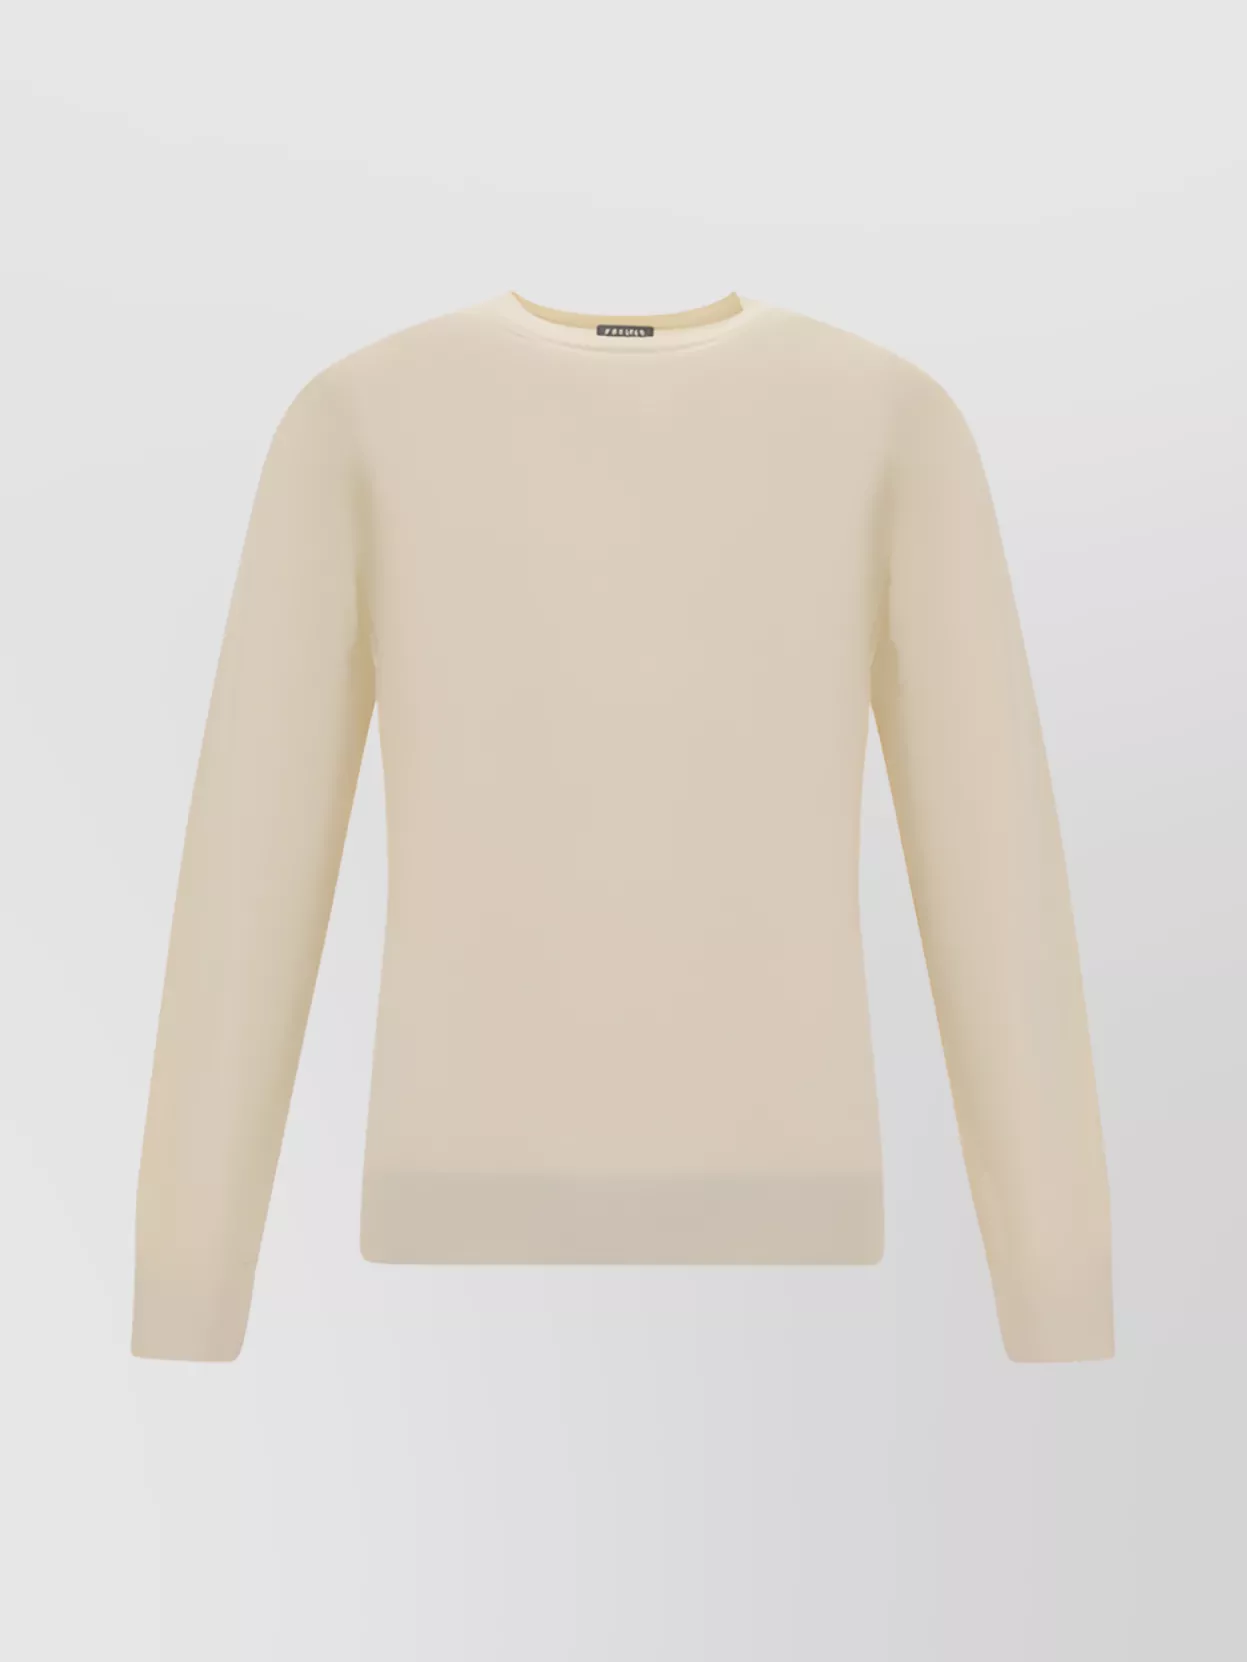 Zegna Patterned Crew Neck Sweater In Neutral